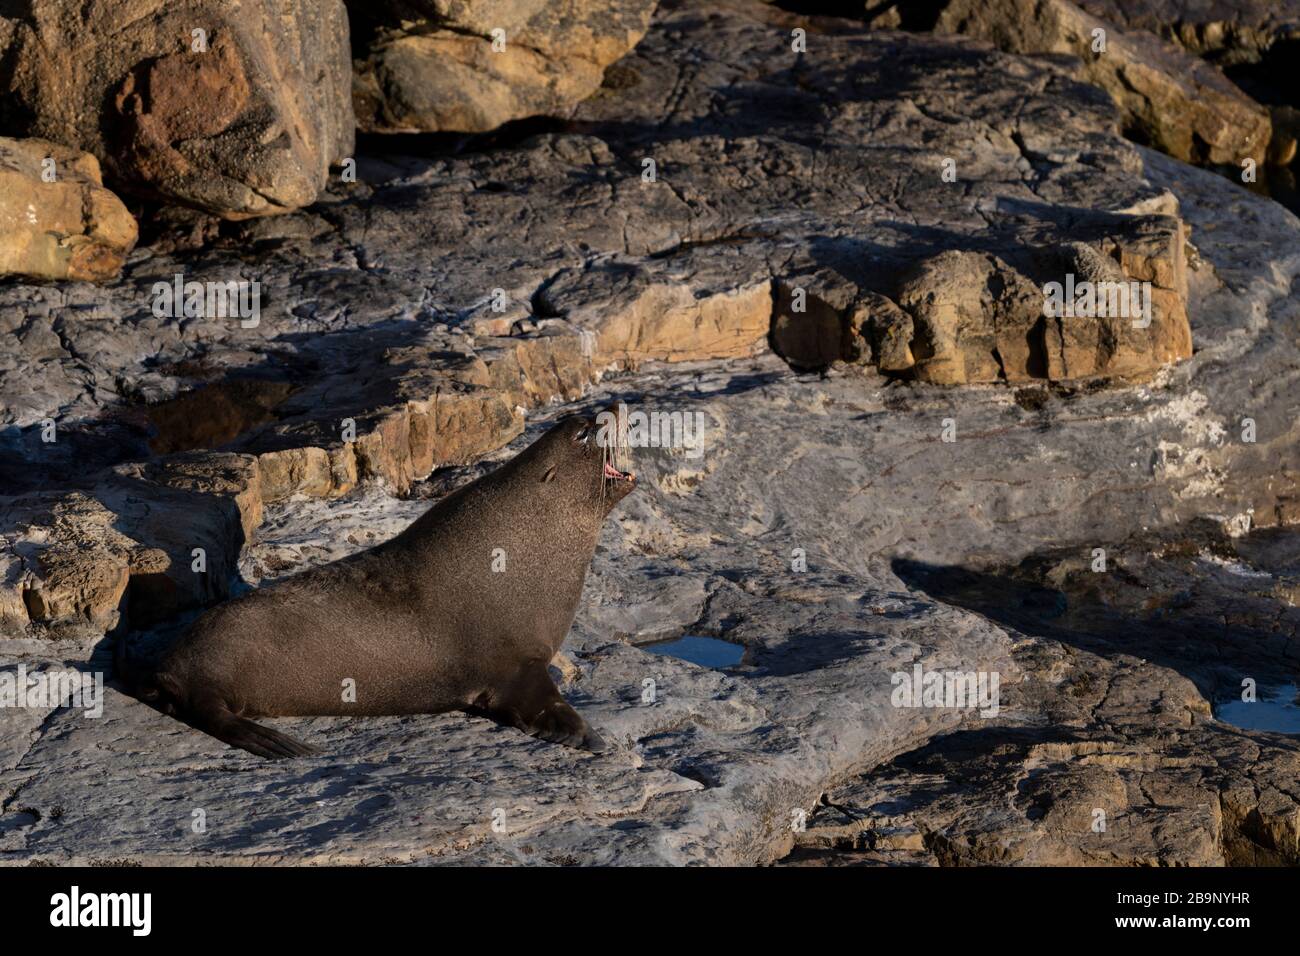 New Zealand fur seal yawning during a sunny sunrise at Shag Point, New Zealand. There is a full colony of "kekeno", the name given by the Maori, on th Stock Photo